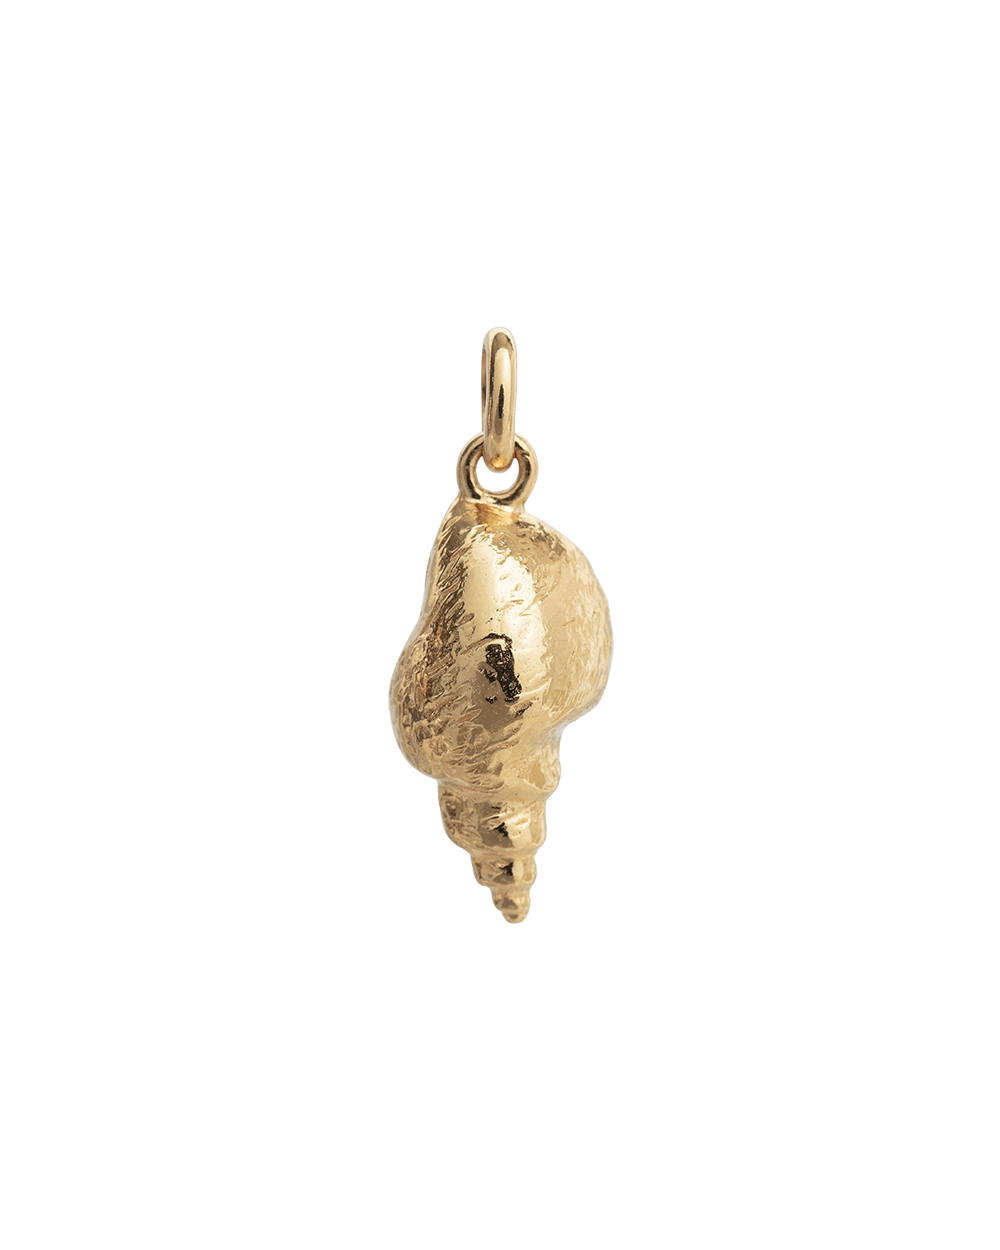 CONCH SHELL (18K GOLD VERMEIL) - IMAGE 4